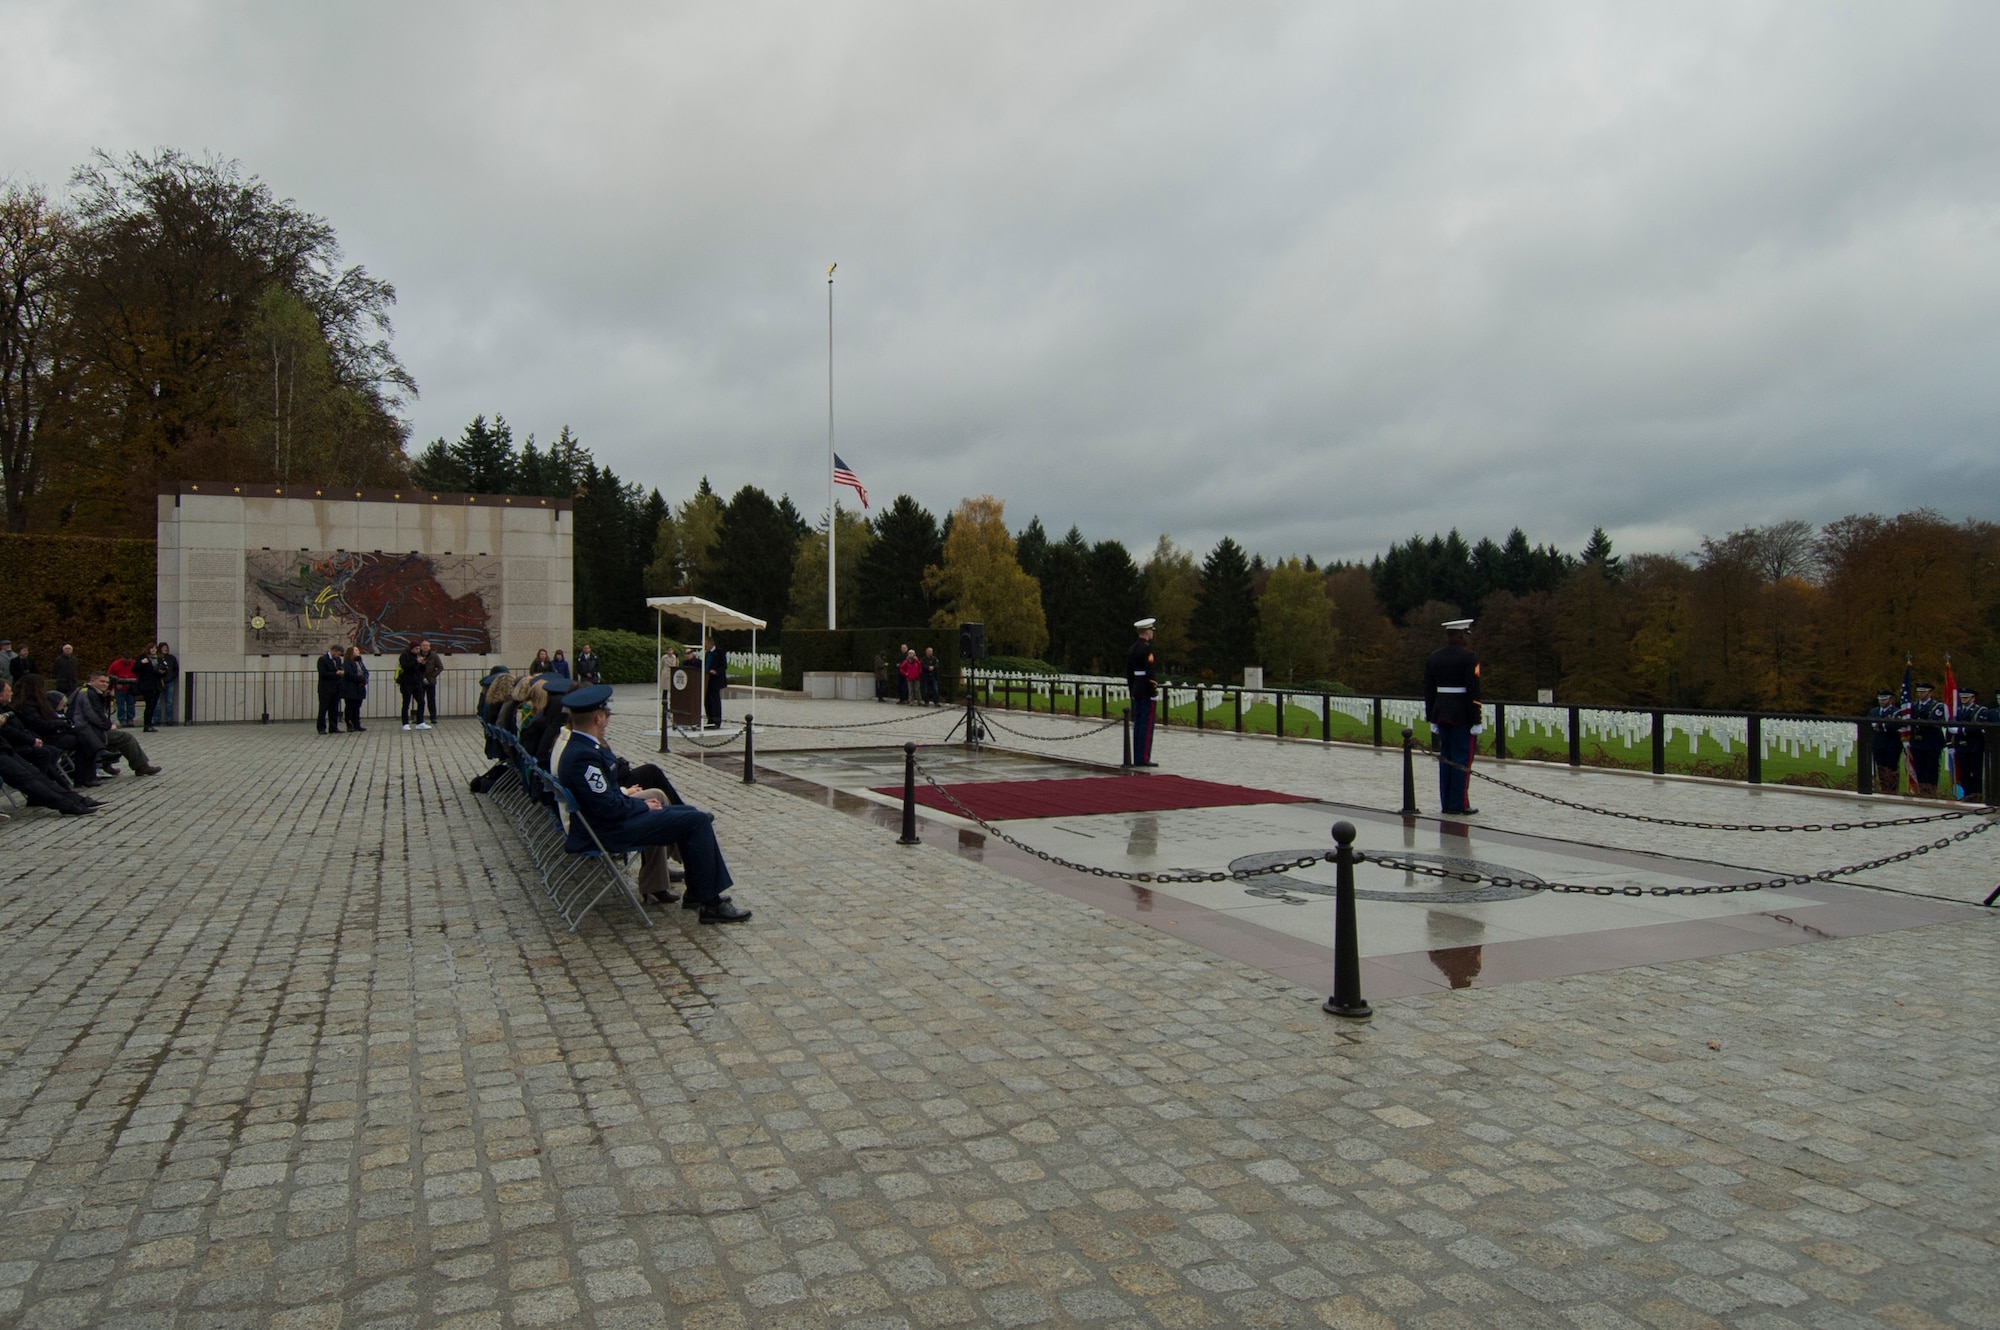 Citizens of Luxembourg and the United States of America listen during a Memorial Day ceremony at the Luxembourg American Military Cemetery and Memorial in Luxembourg, Nov. 11, 2016. The ceremony paid tribute to the legacy of service of members of the American armed forces. (U.S. Air Force photo by Staff Sgt. Joe W. McFadden)